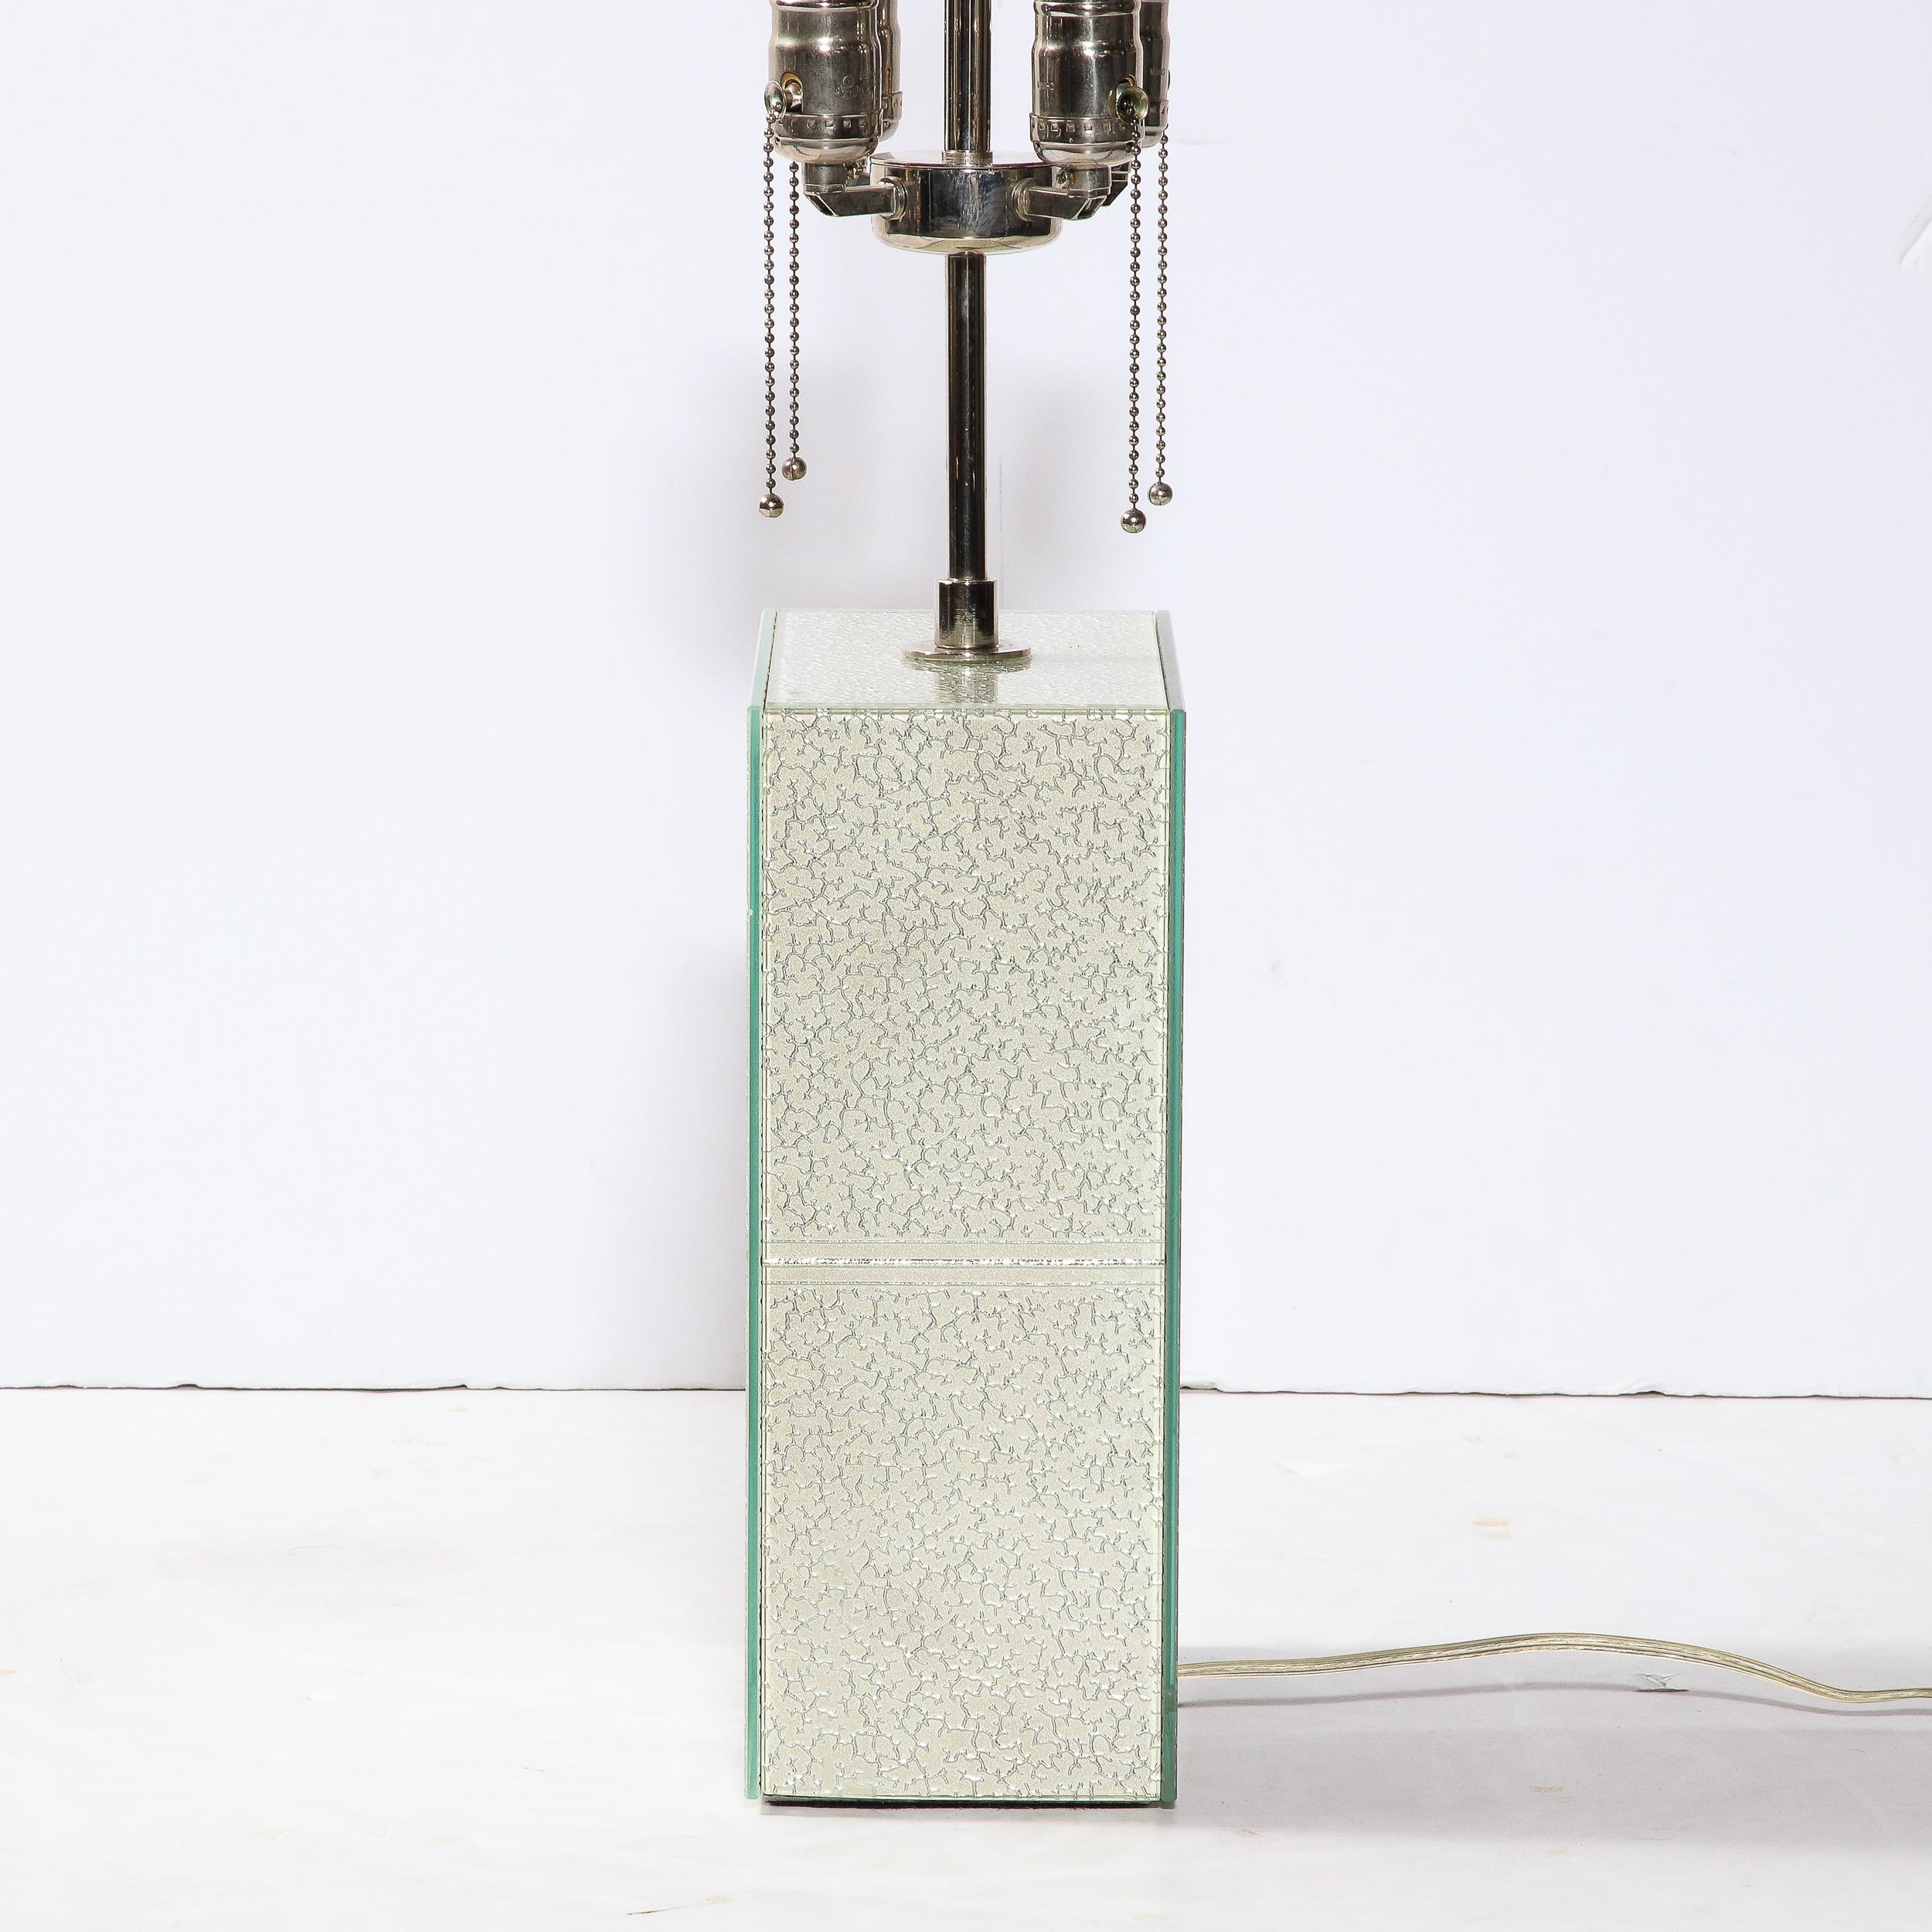 Modernist Rectilinear Glass Table Lamp in Frost Blue Craquelure by Robert Rida For Sale 3